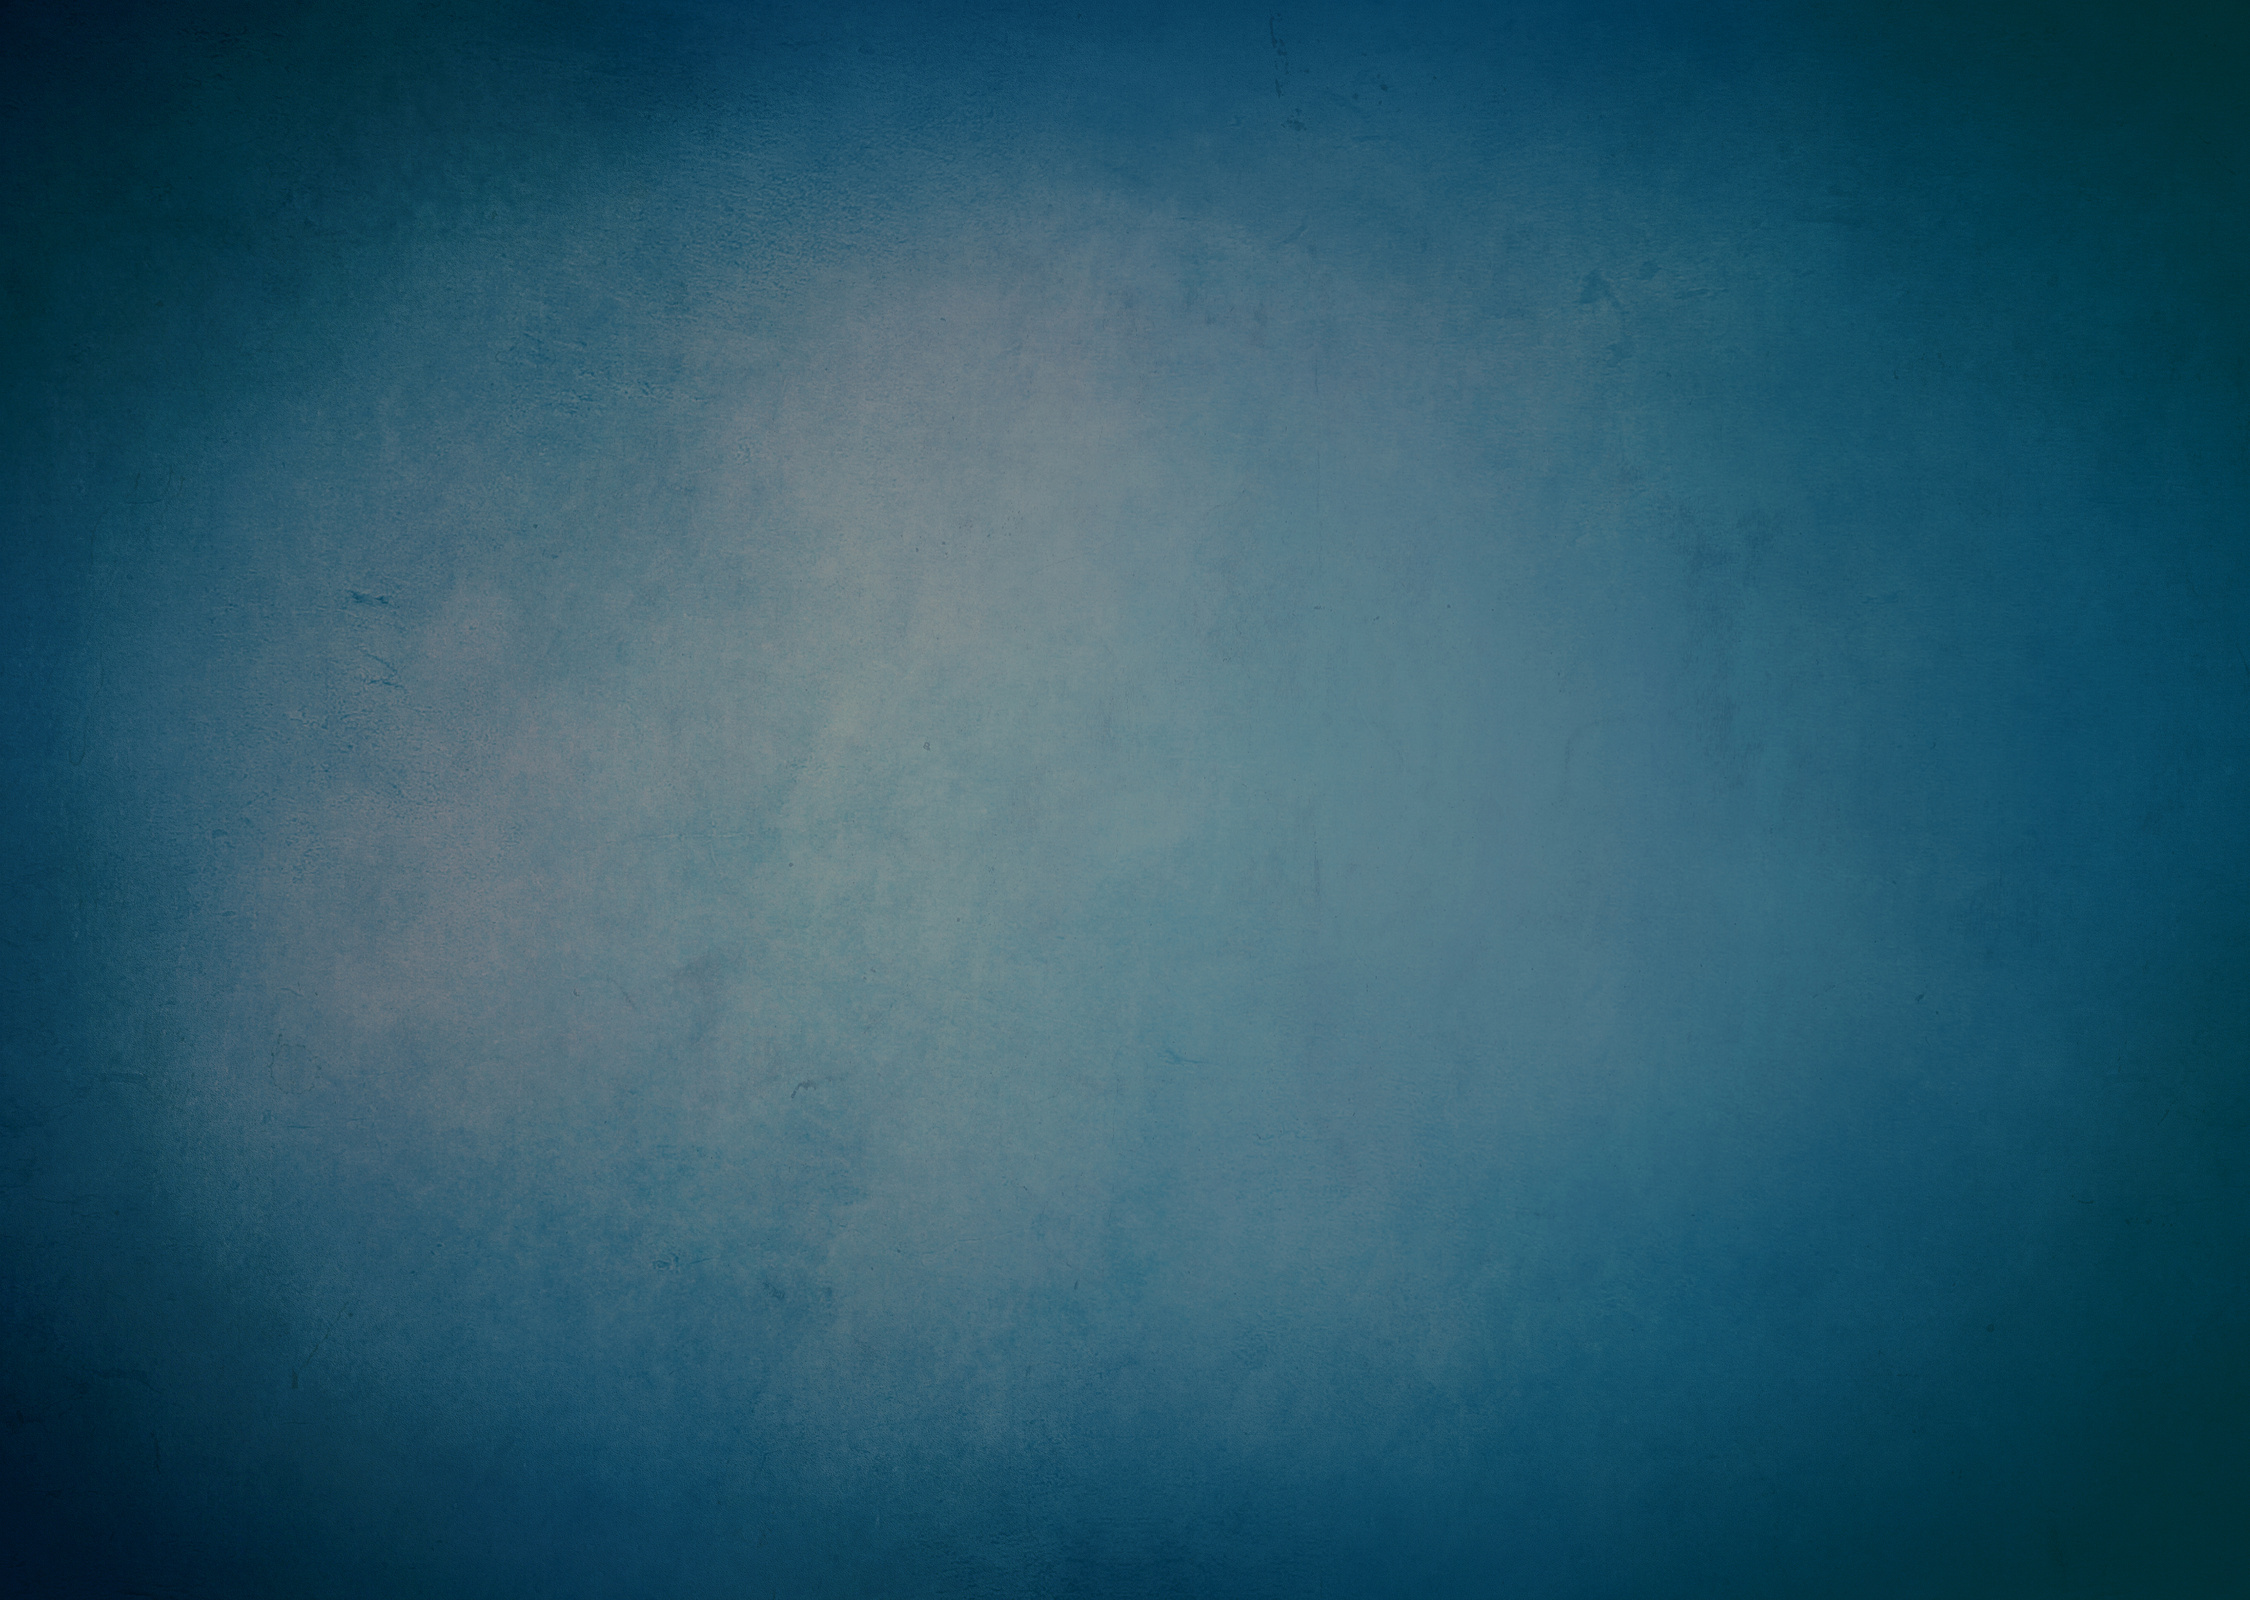 Blue green romantic grungy background texture